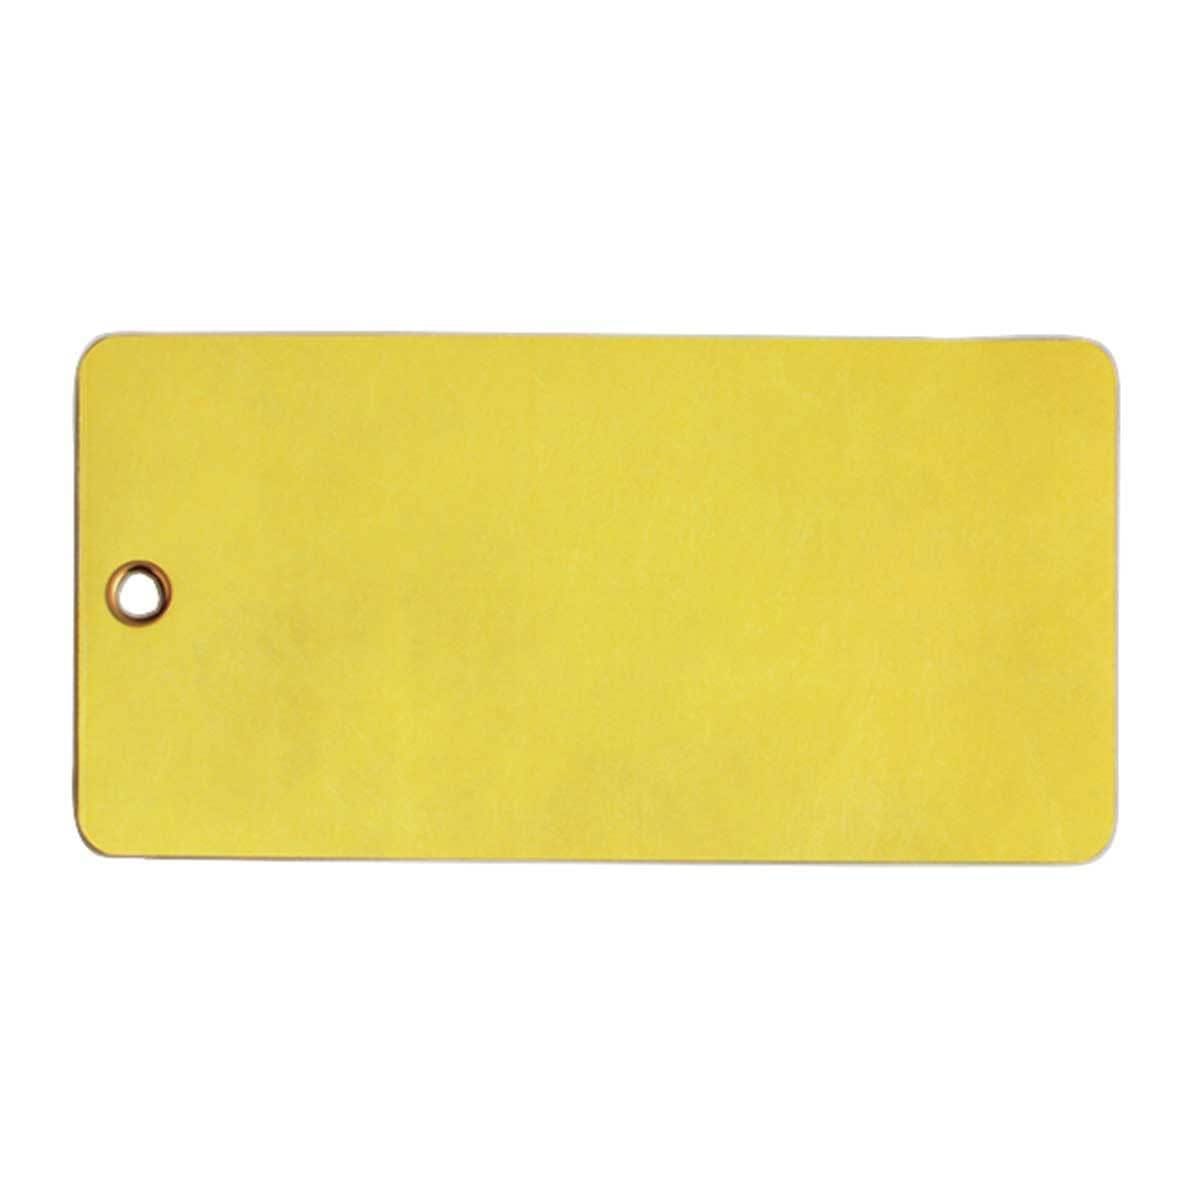 Colored Tyvek ID Tags